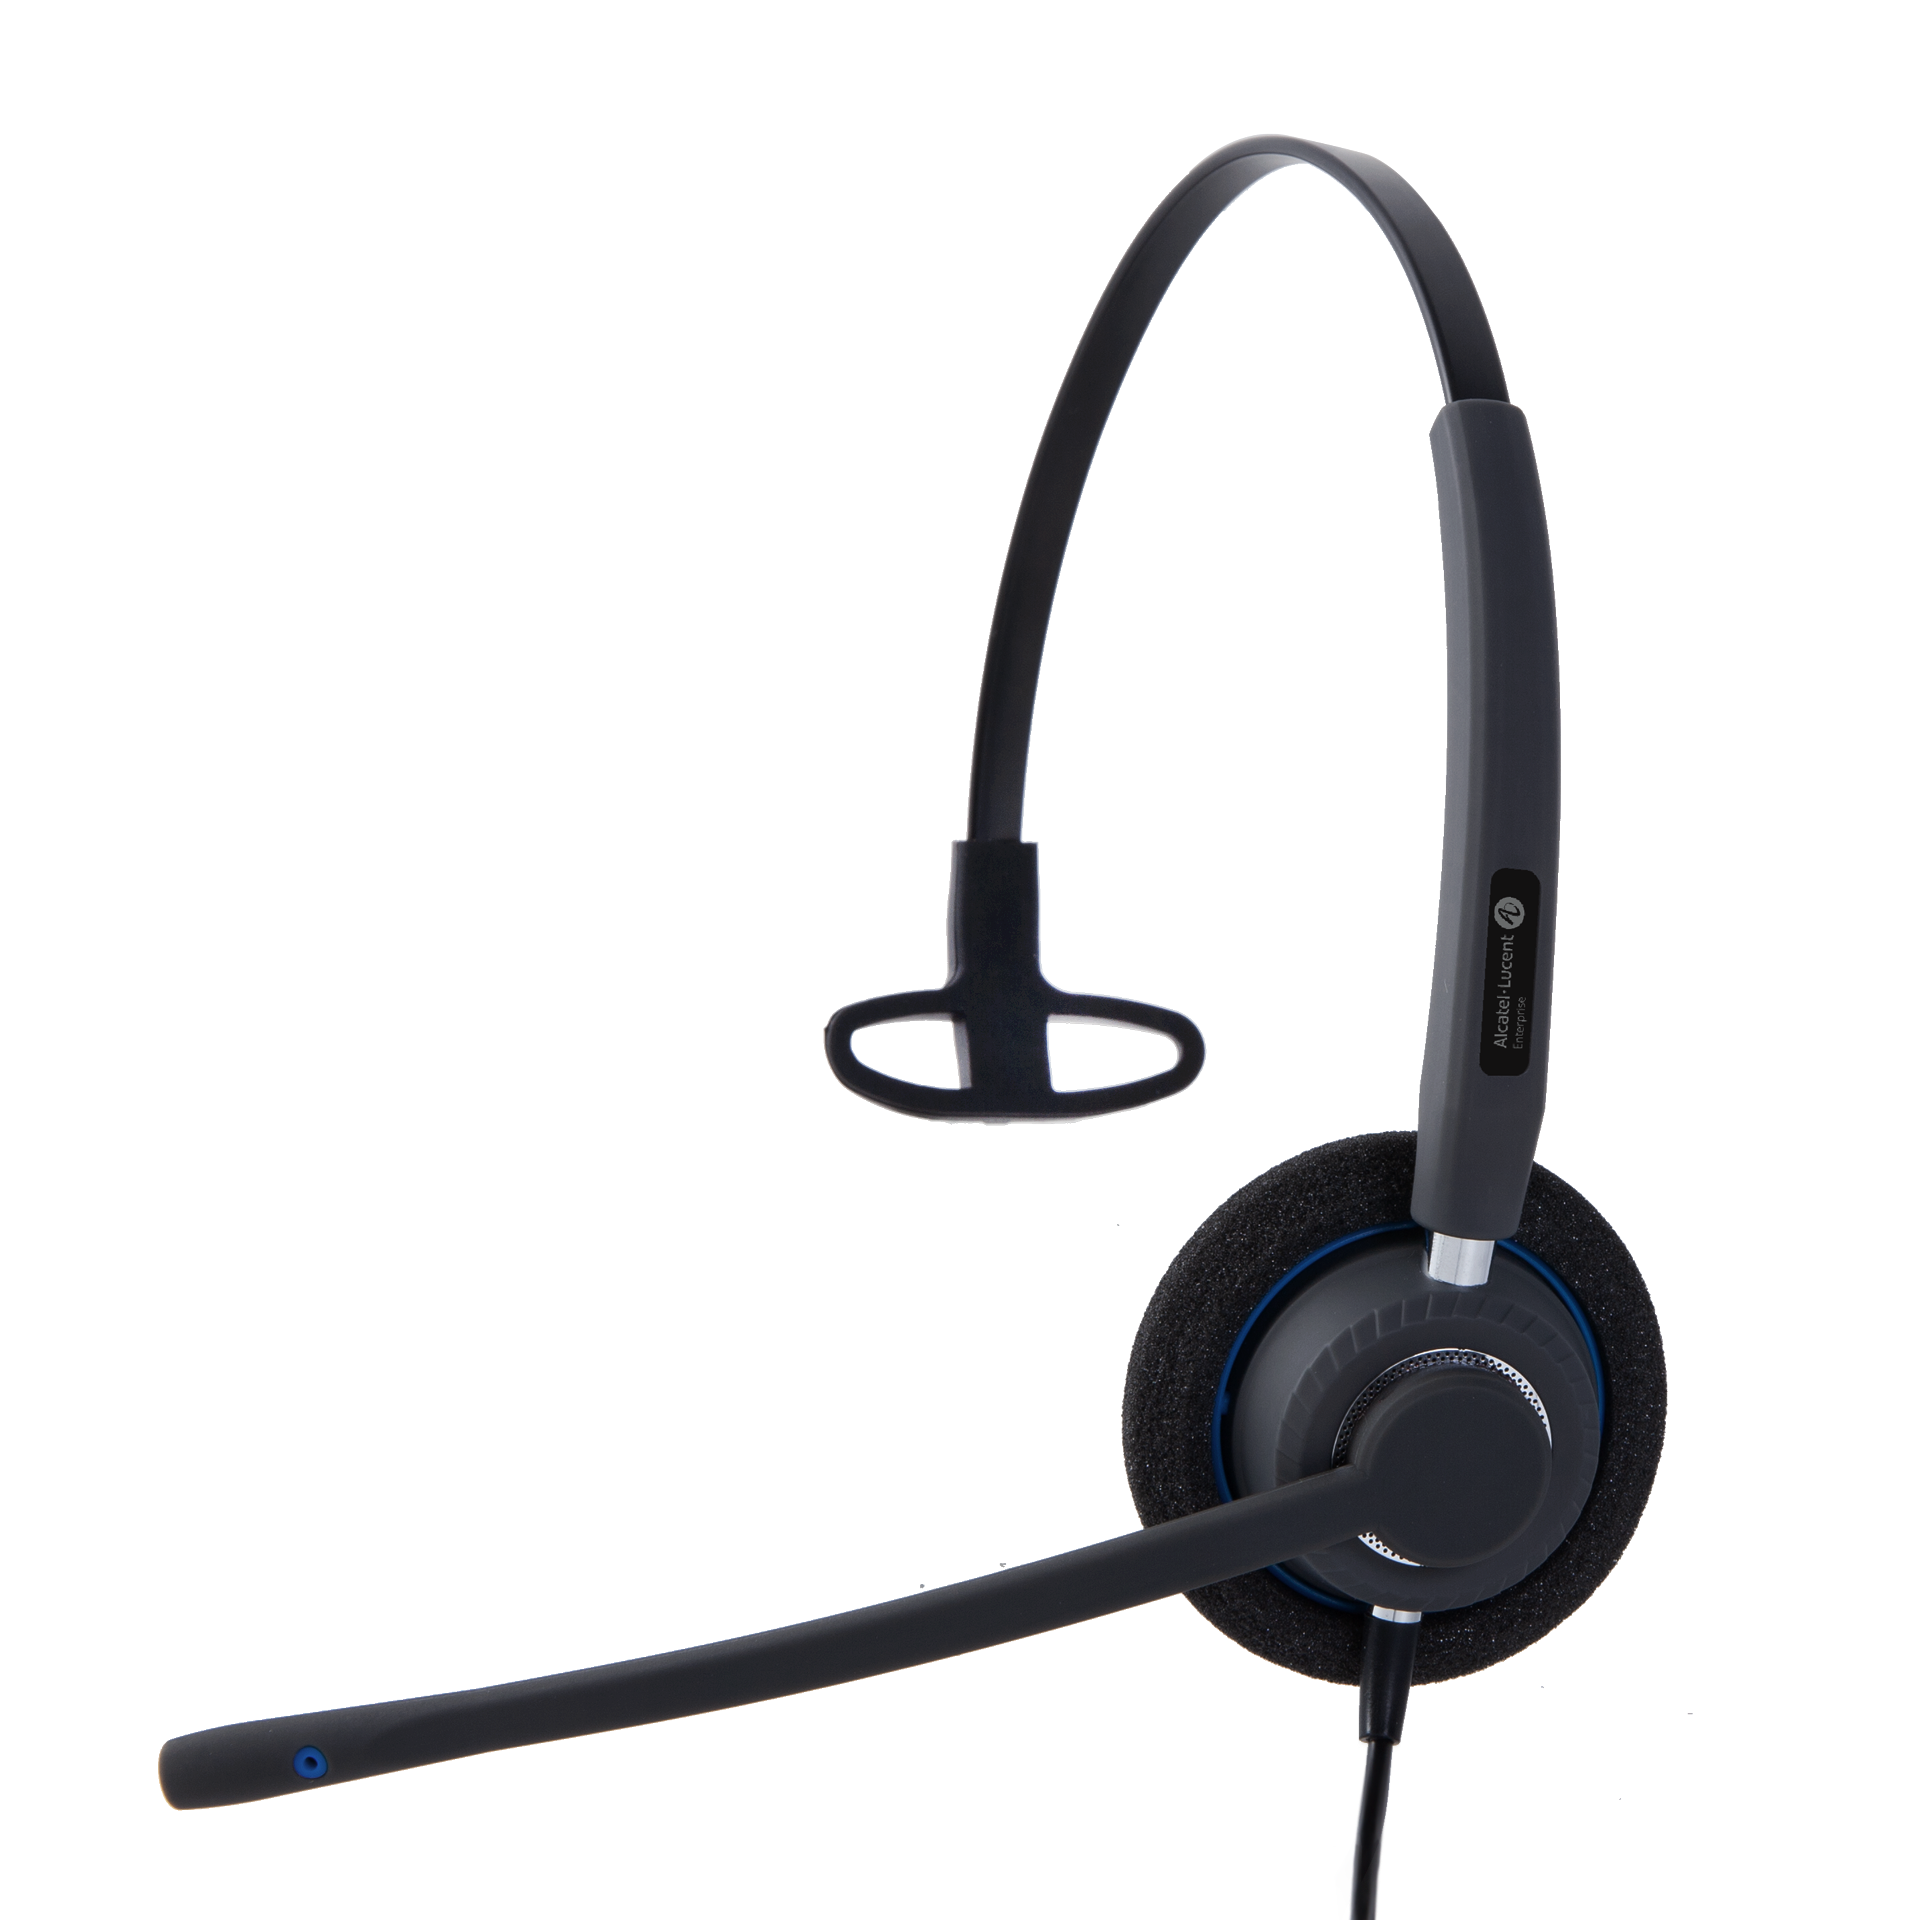 Call Centers, Online Education, And Unified Communications AH 21 U II Corded Monaural Premium Headset